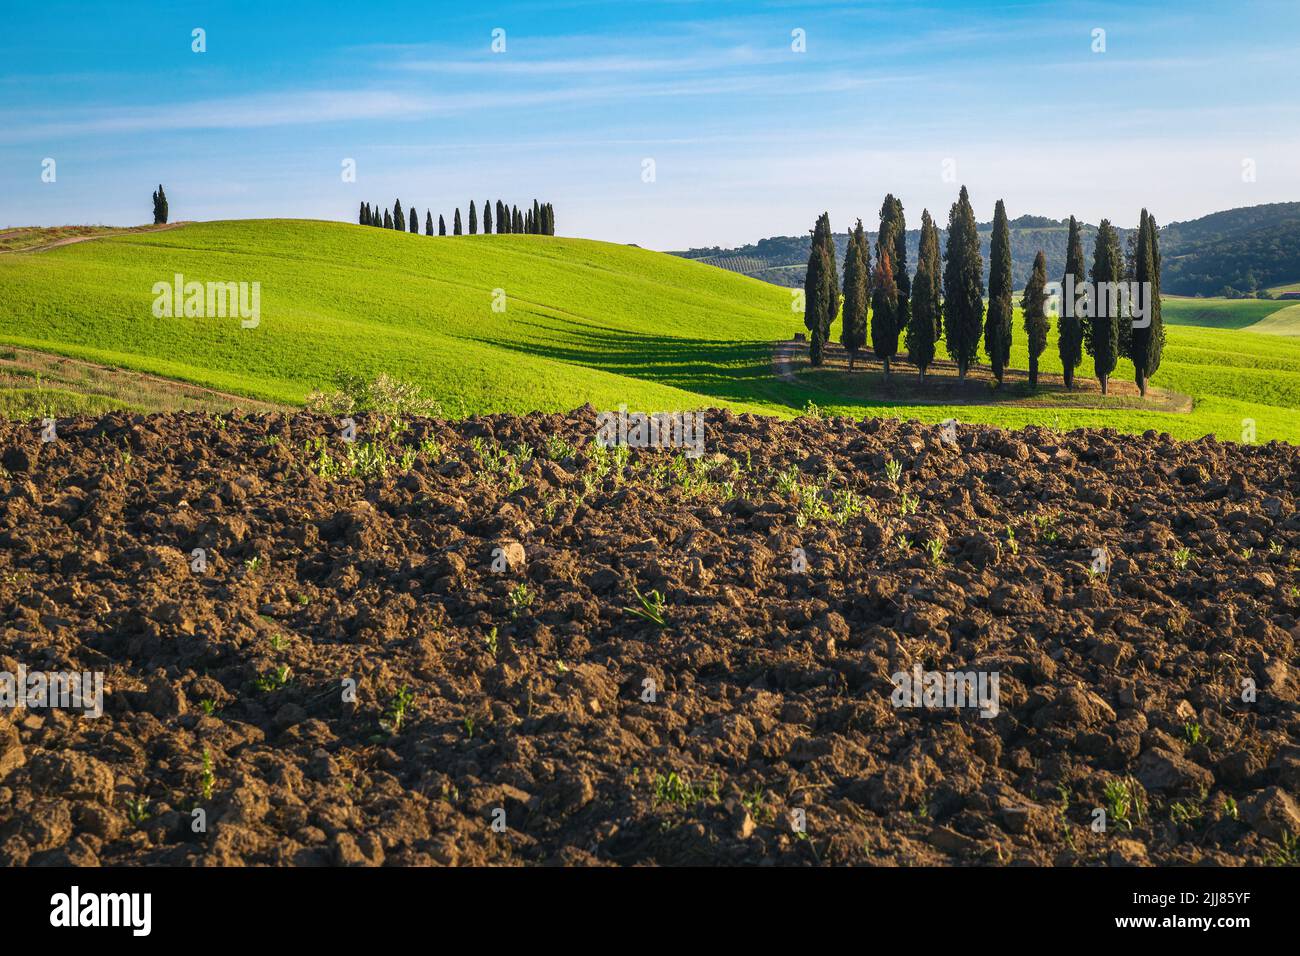 Majestic summer plowed fields with cypress trees and agricultural fields in Tuscany, Italy, Europe Stock Photo